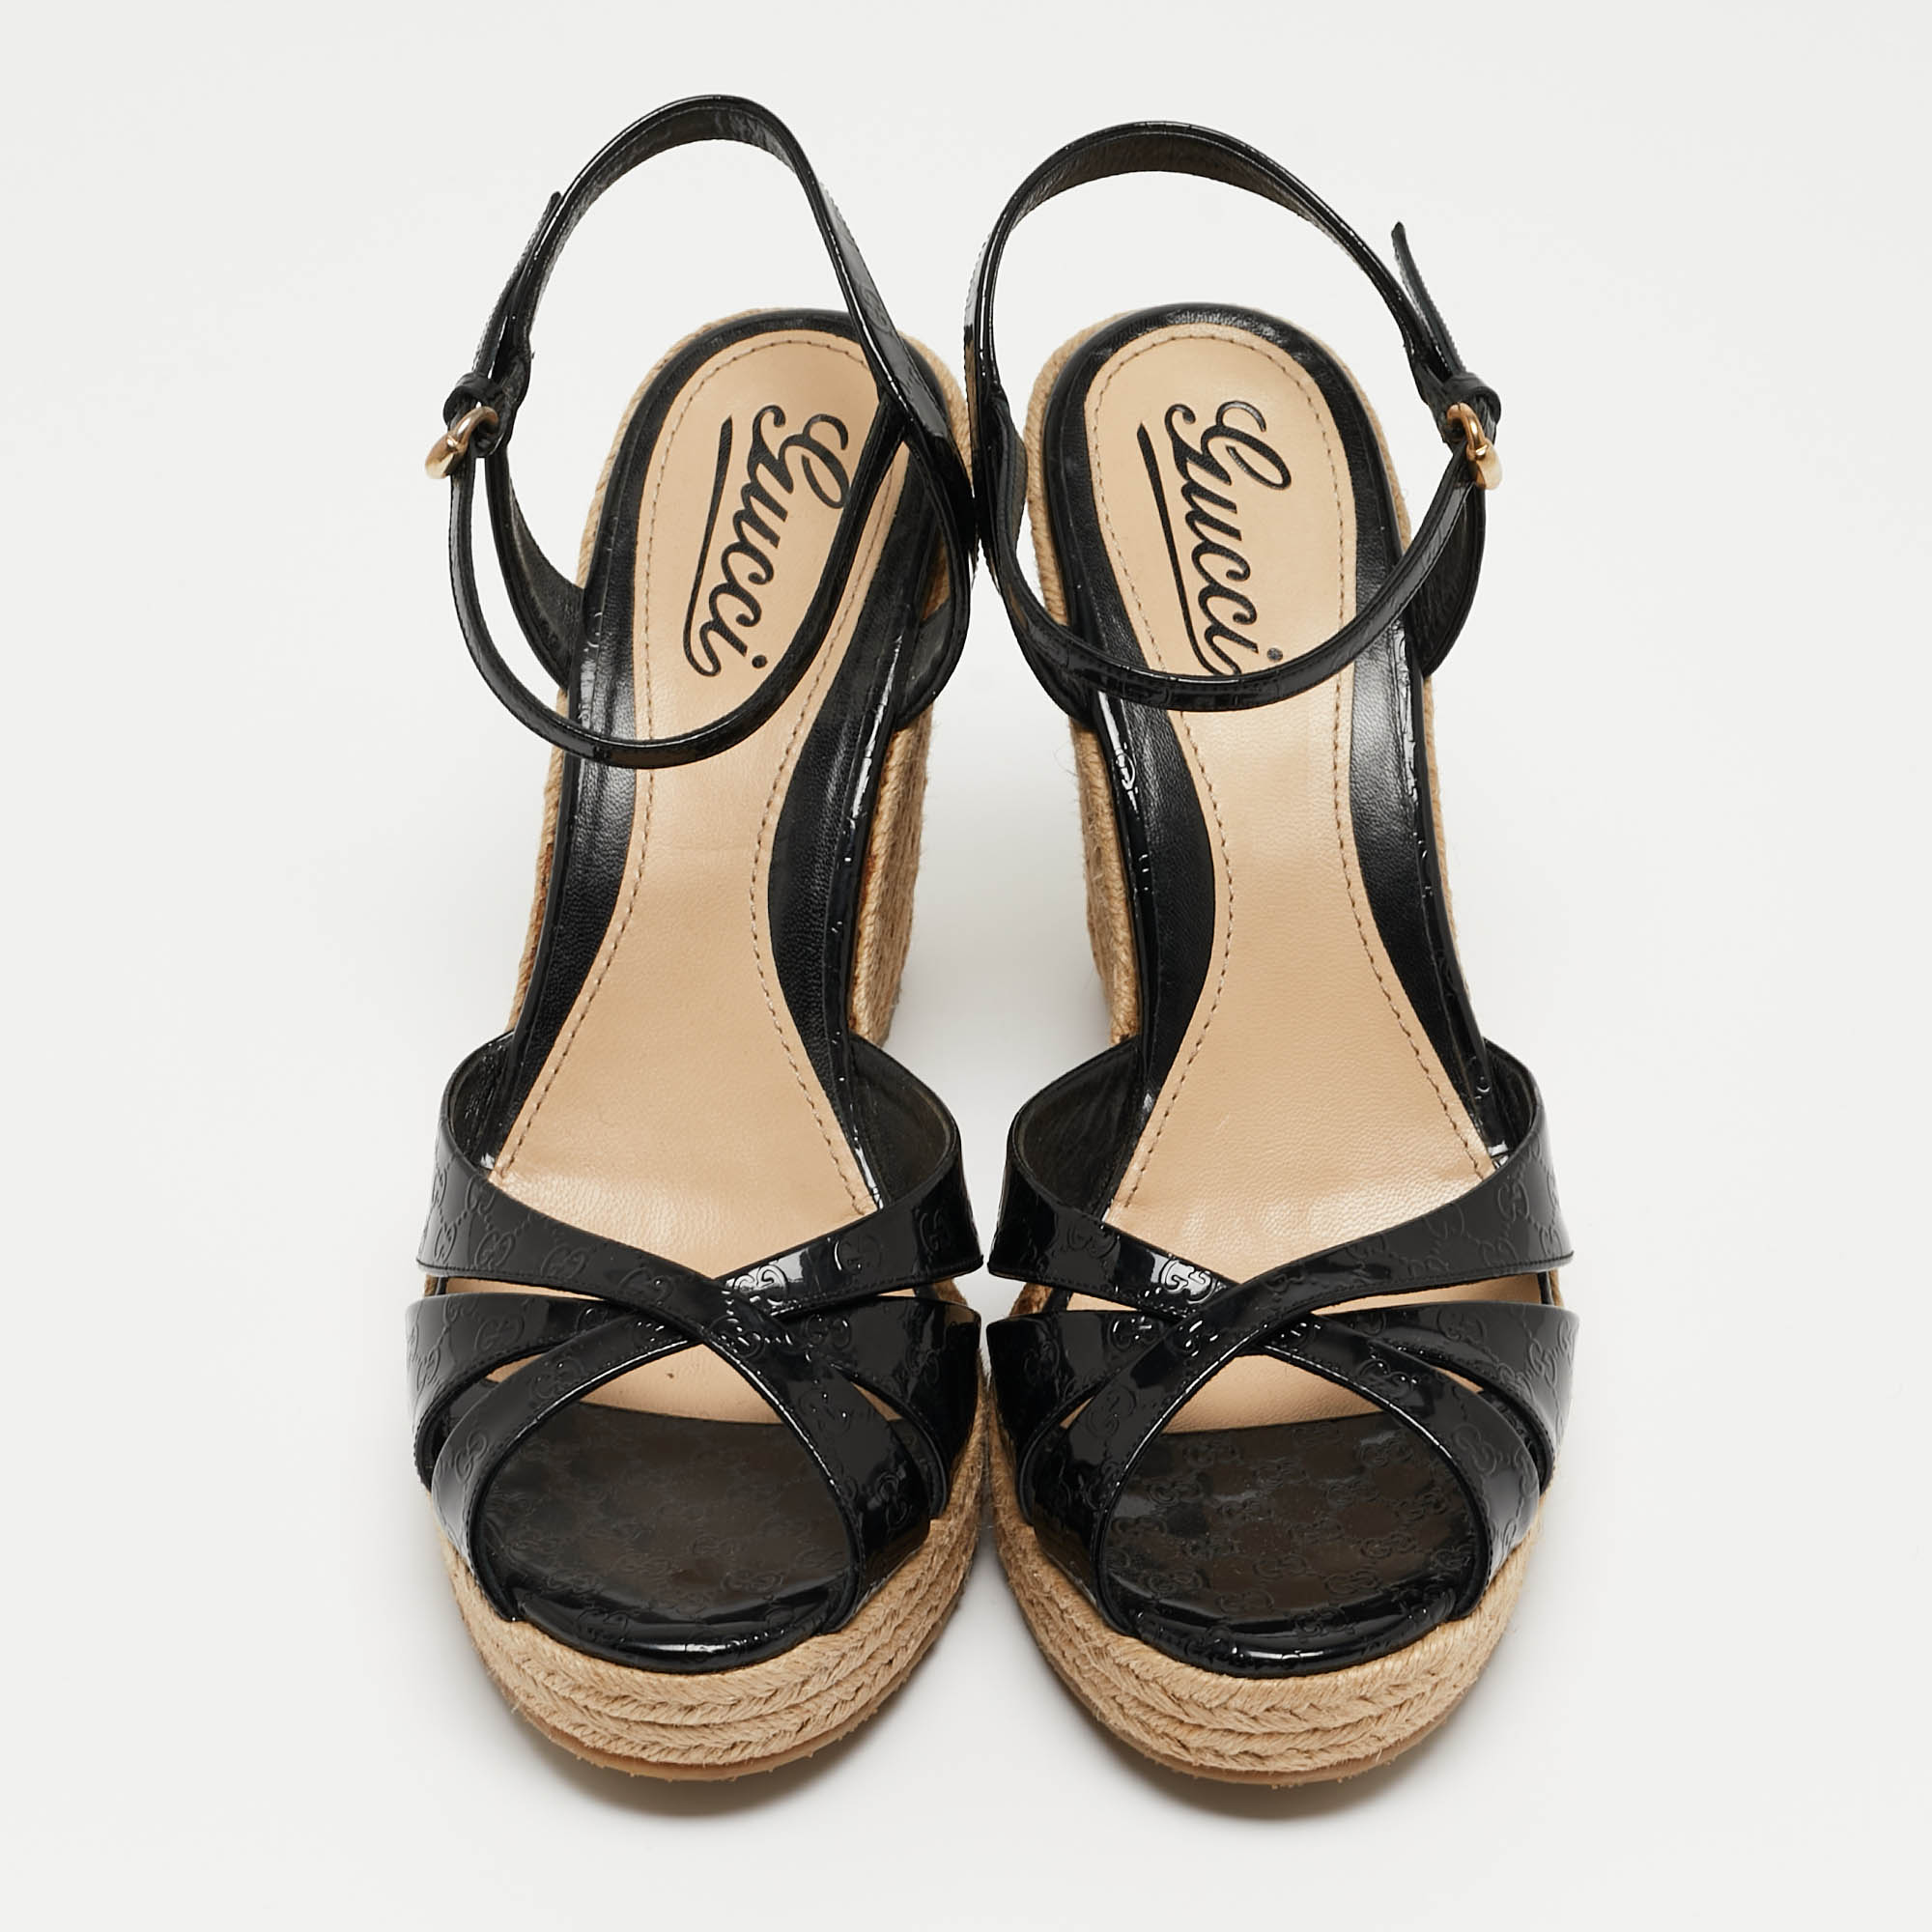 Gucci Black Microguccissima Patent Leather Penelope Espadrille Wedge Sandals Size 39